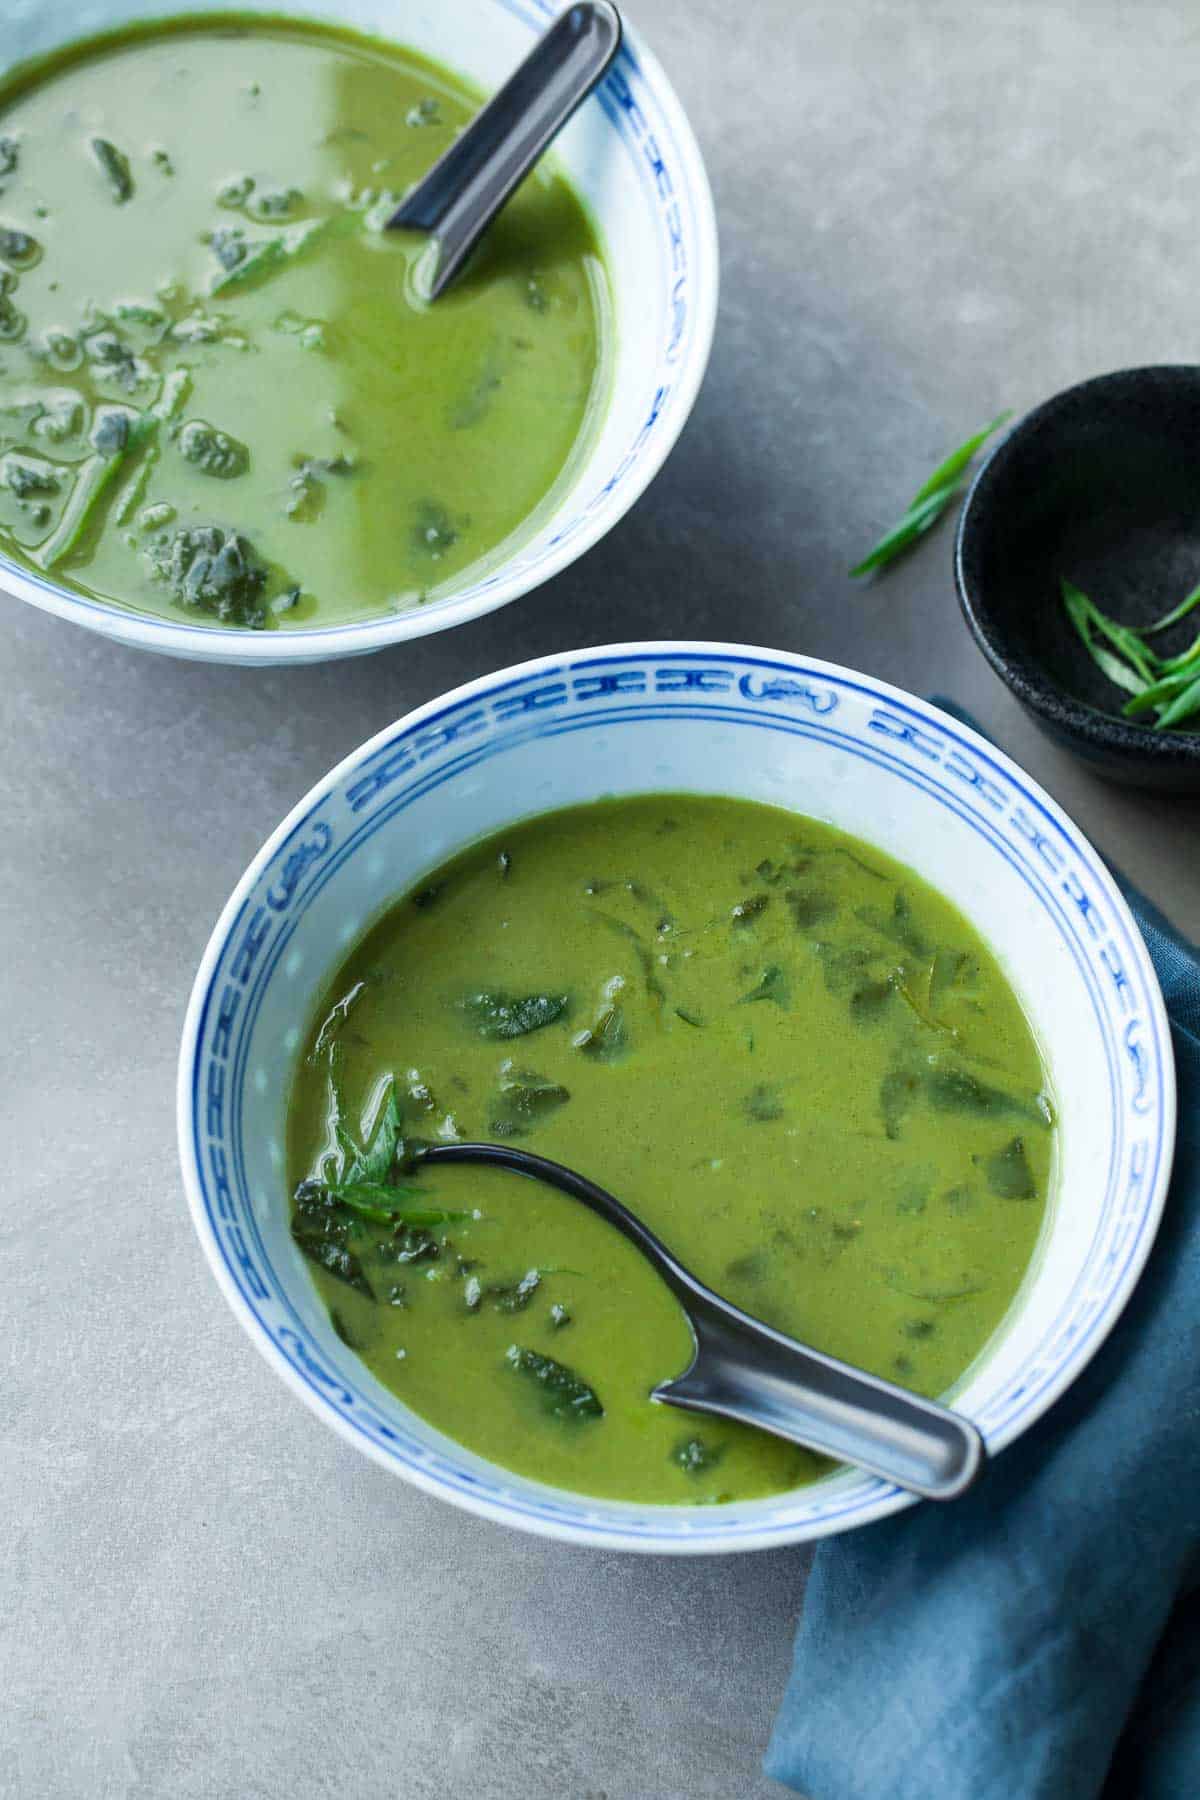 Thai Green Curry Soup in Bowls with Soups and Napkin